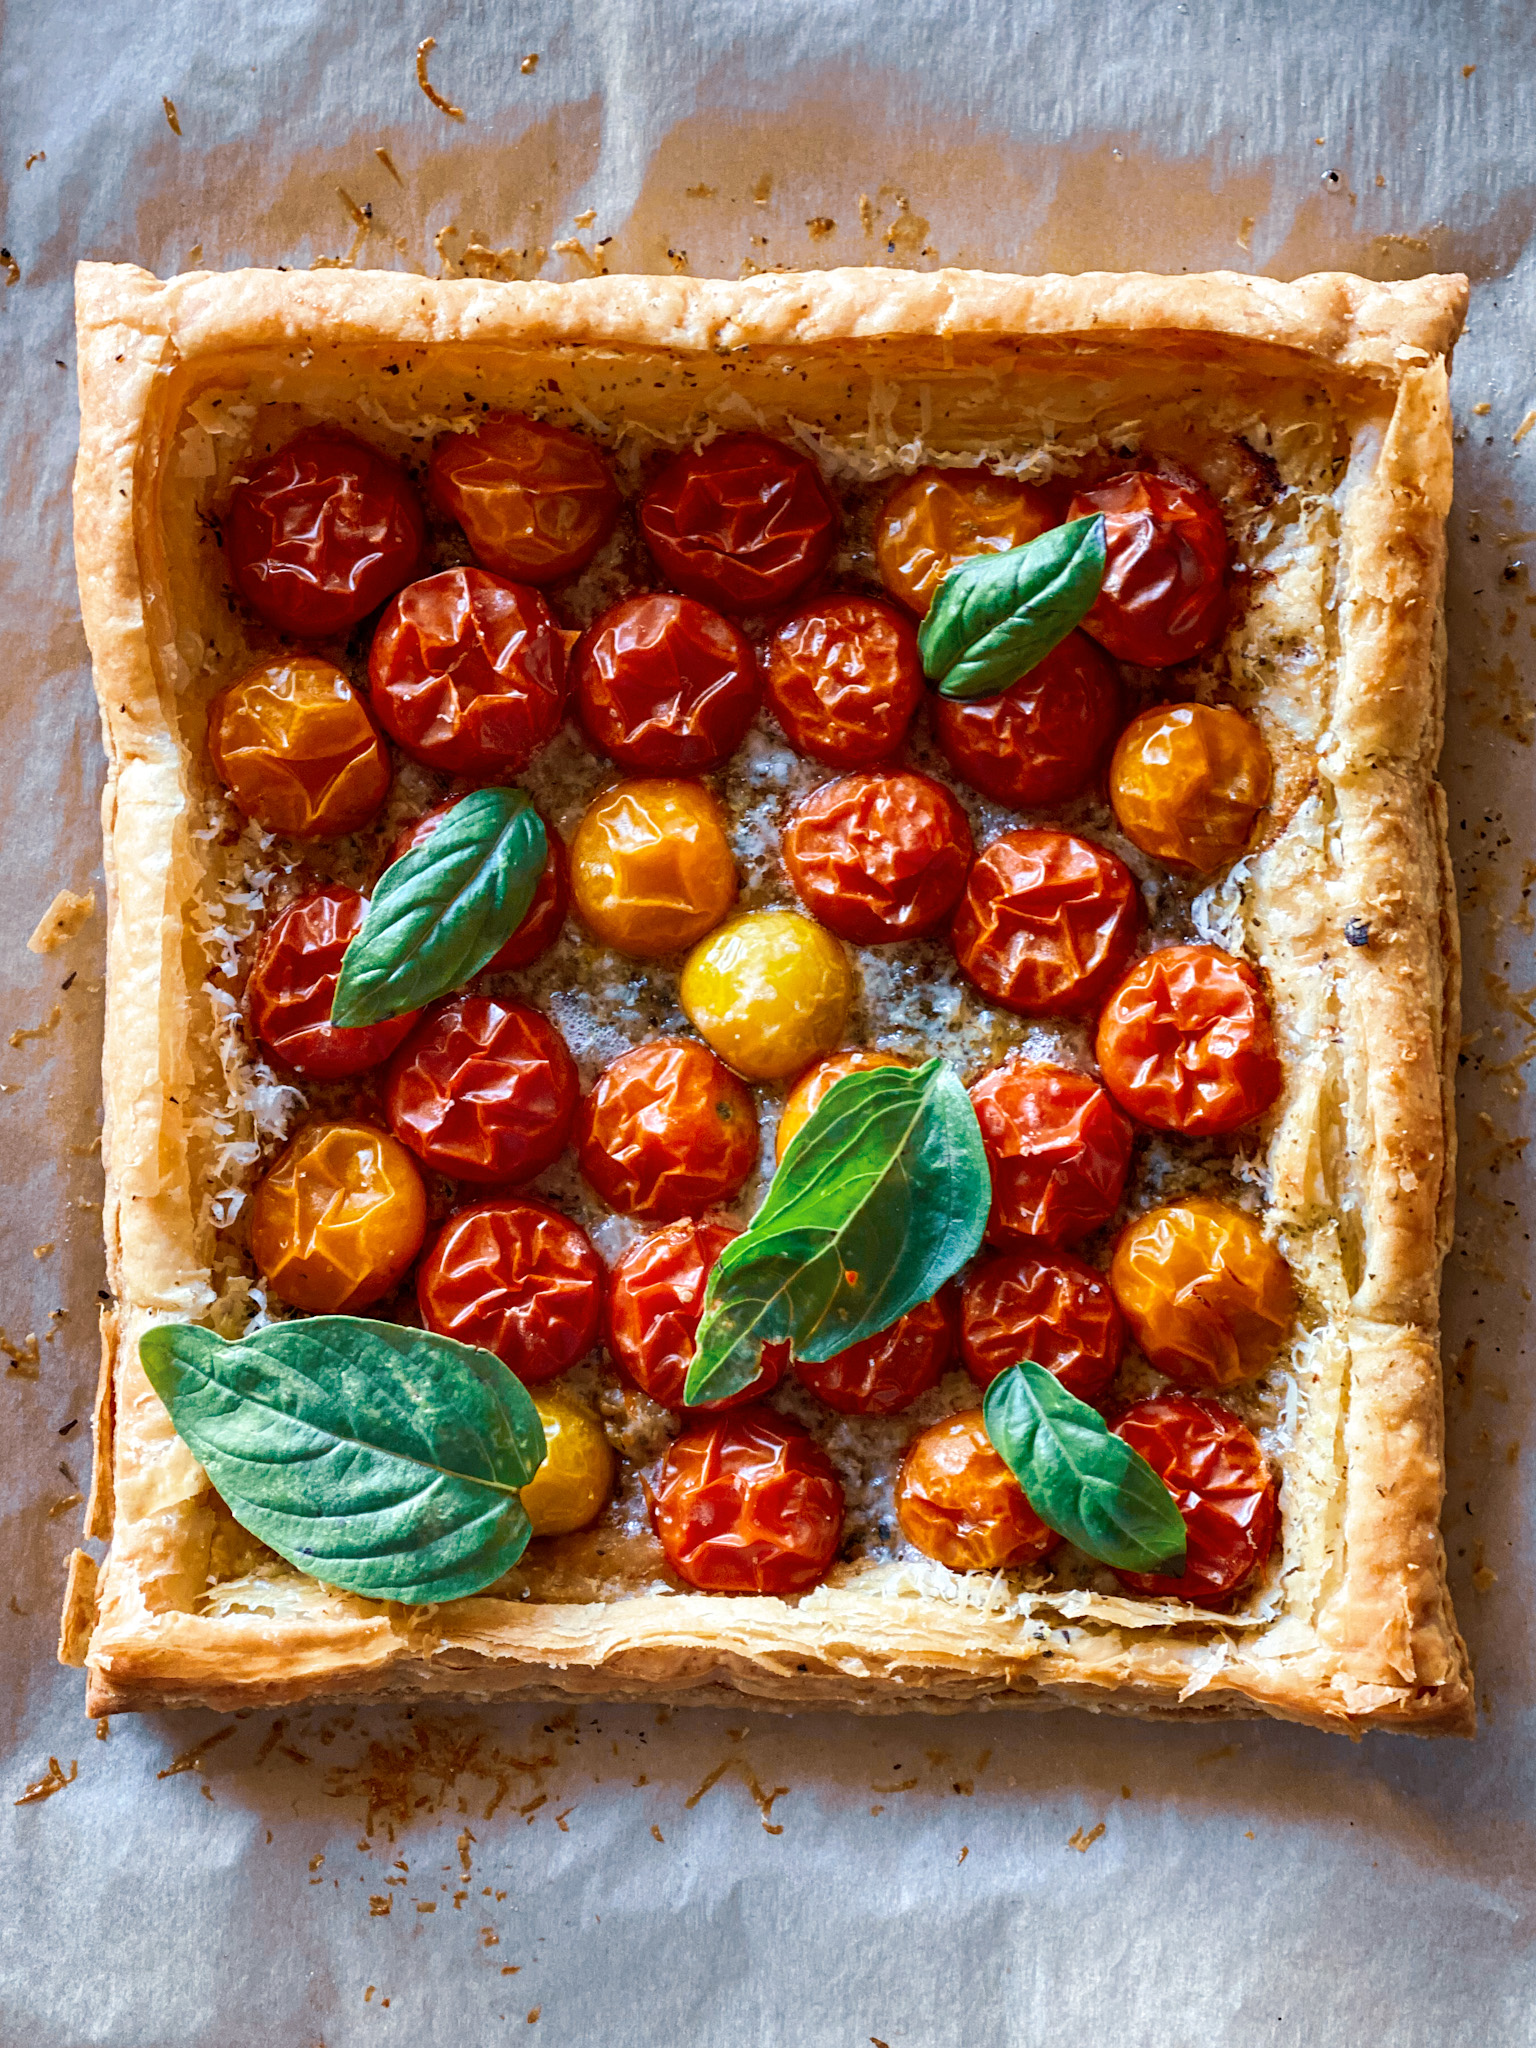 goat cheese tart with tomatoes